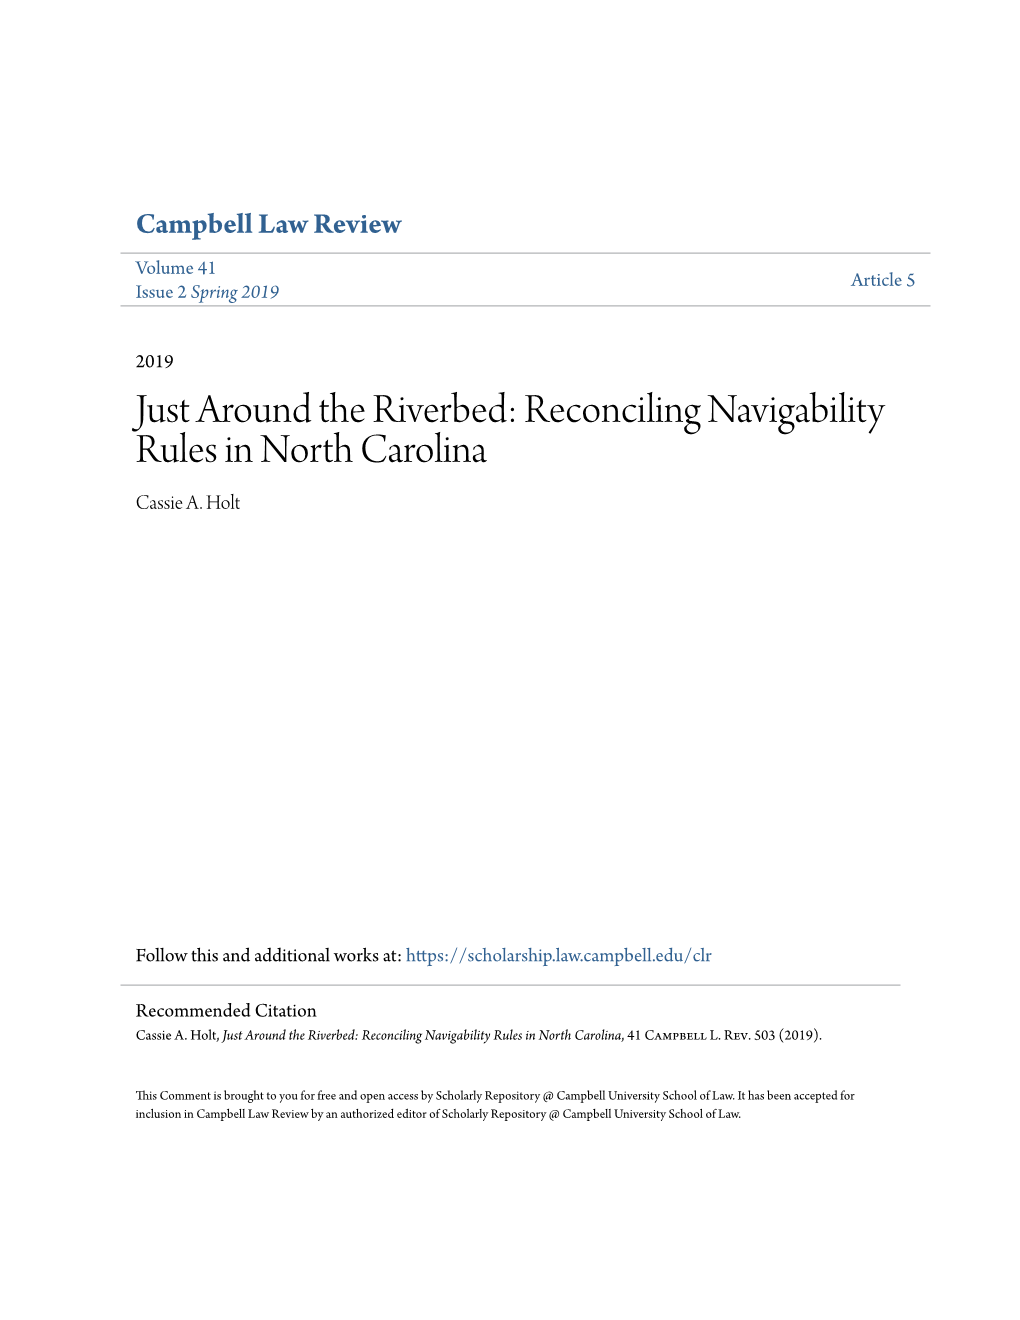 Just Around the Riverbed: Reconciling Navigability Rules in North Carolina Cassie A